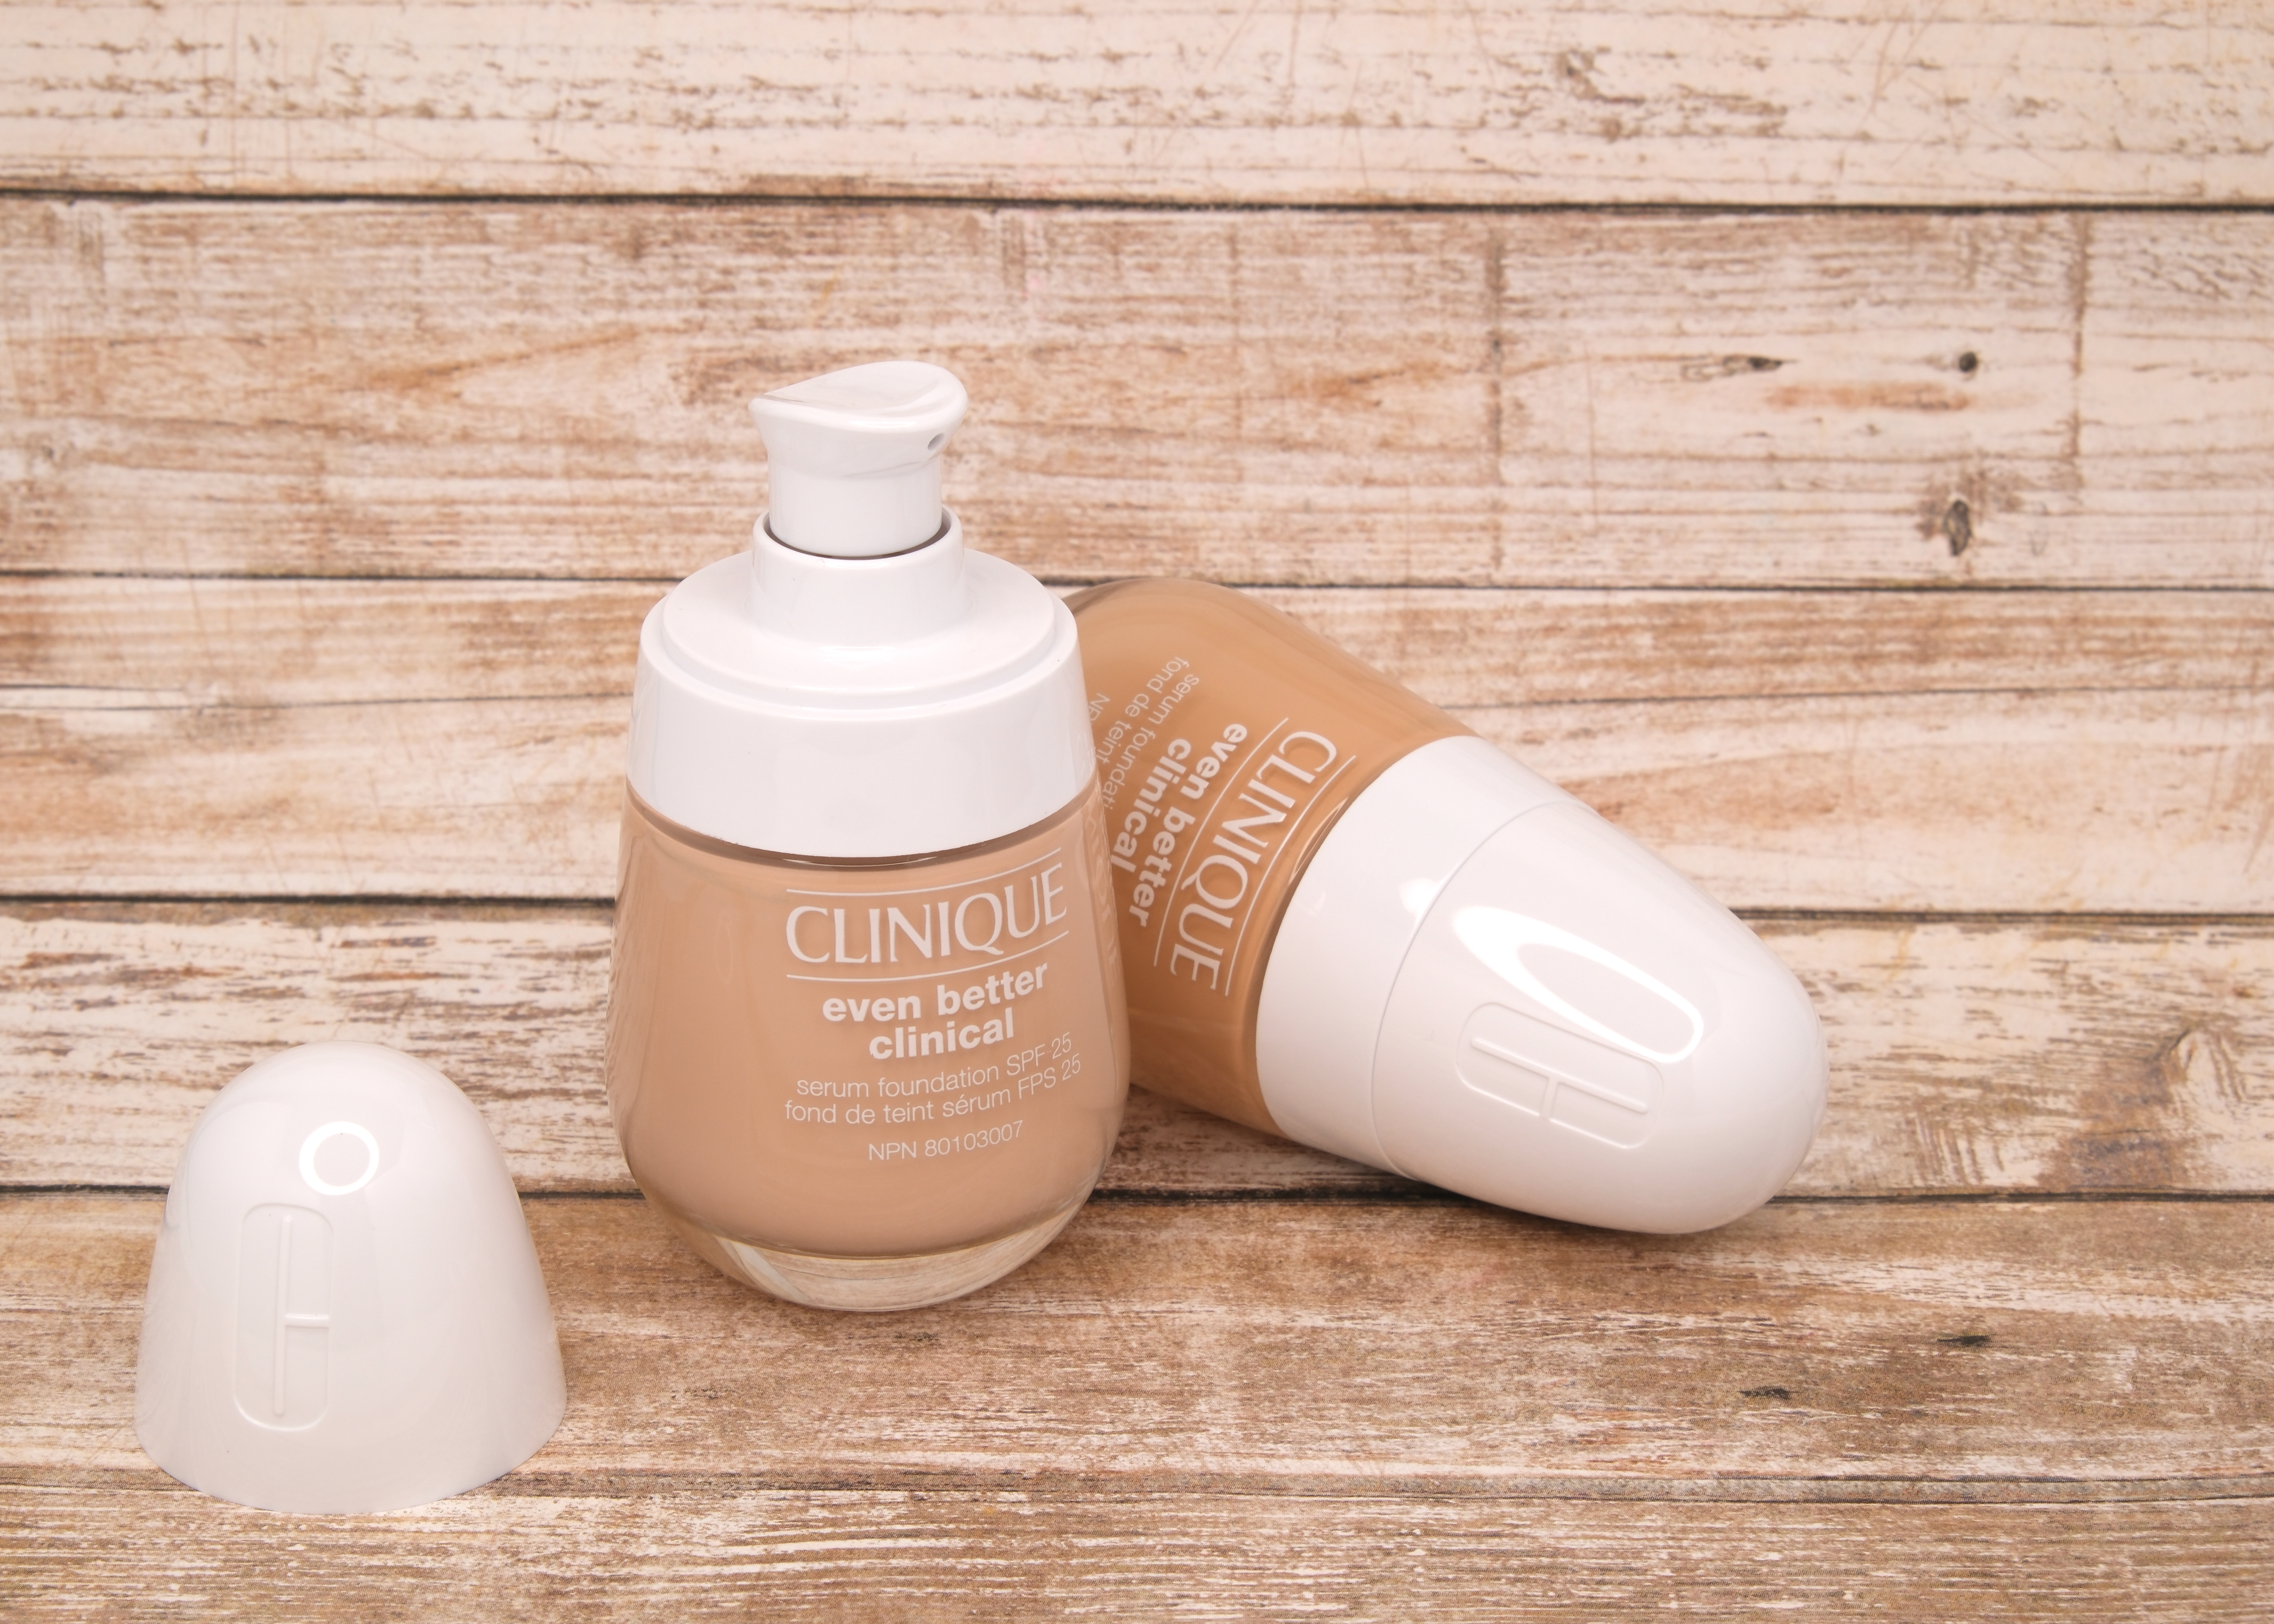 Clinique | Even Better Clinical Serum Foundation SPF 25: Review and Swatches